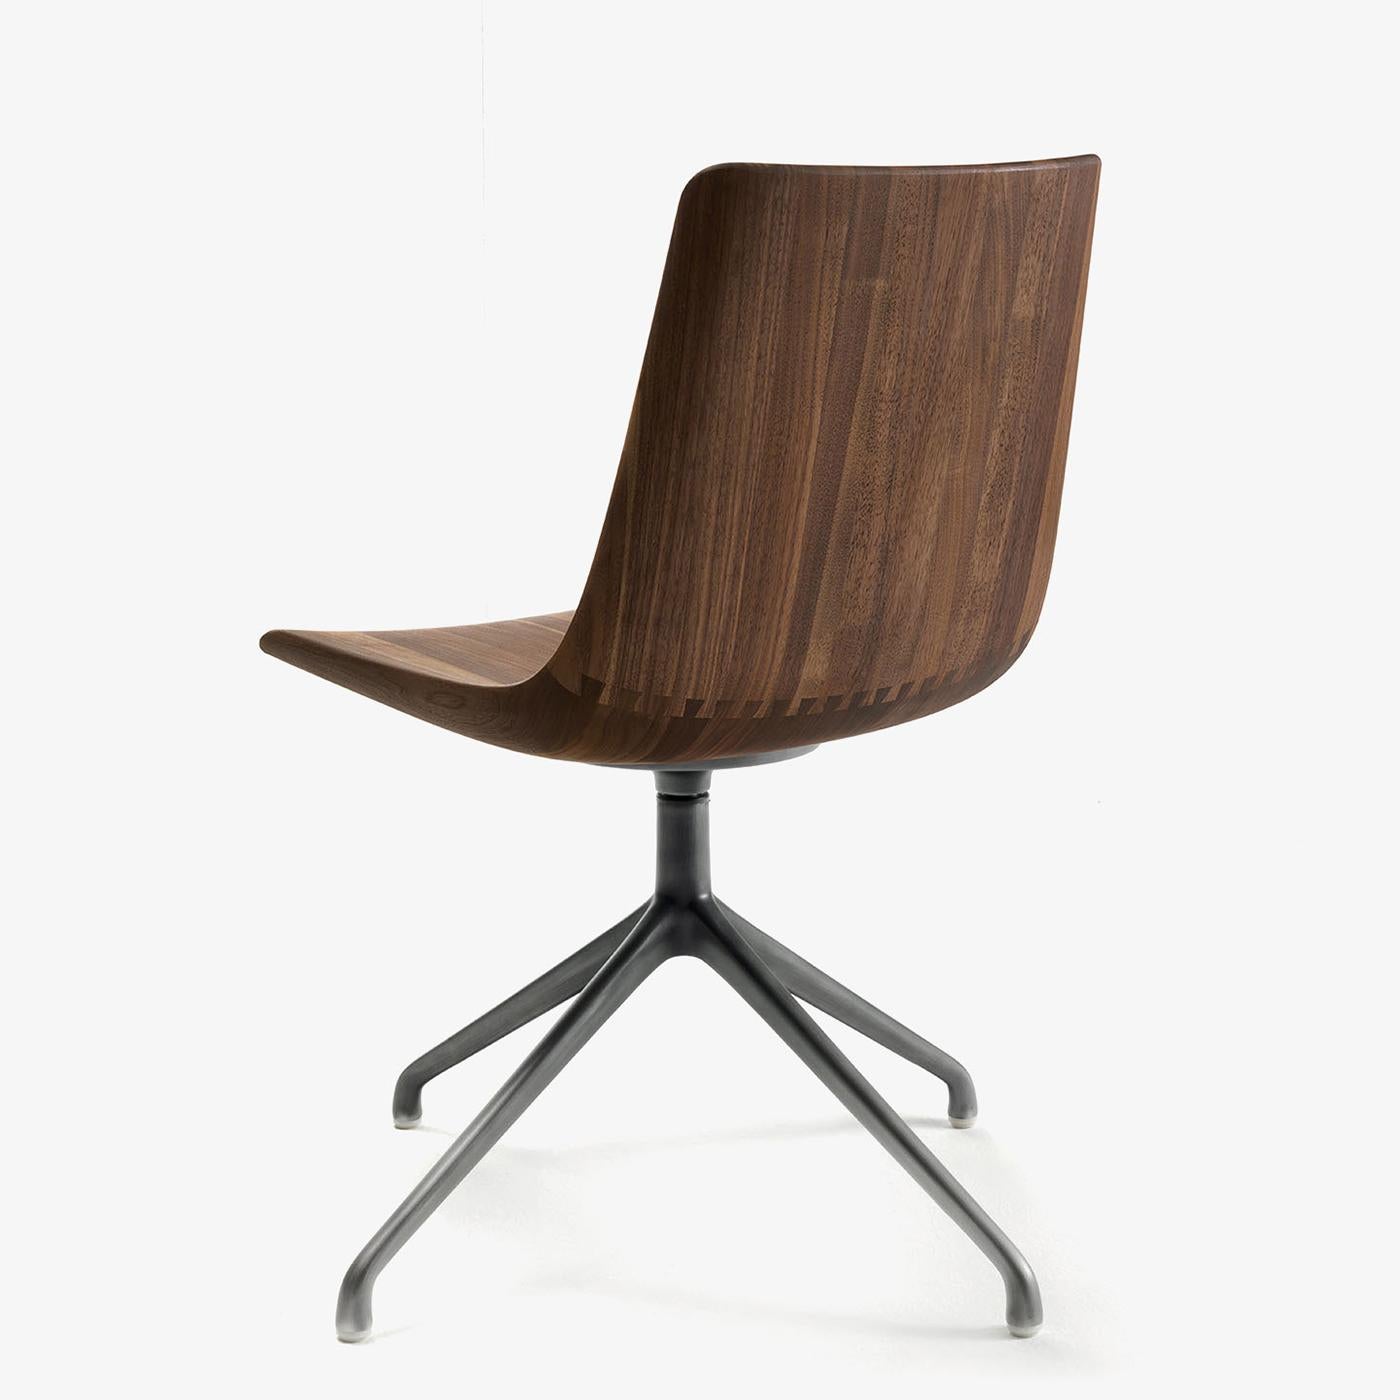 Chair Neutra in solid walnut wood,
back and seat jointed through dovetail joints.
With swivel steel base in lacquered irondust finish. 
Wood treated with natural pine extracts wax.
Also available in solid oak on request.